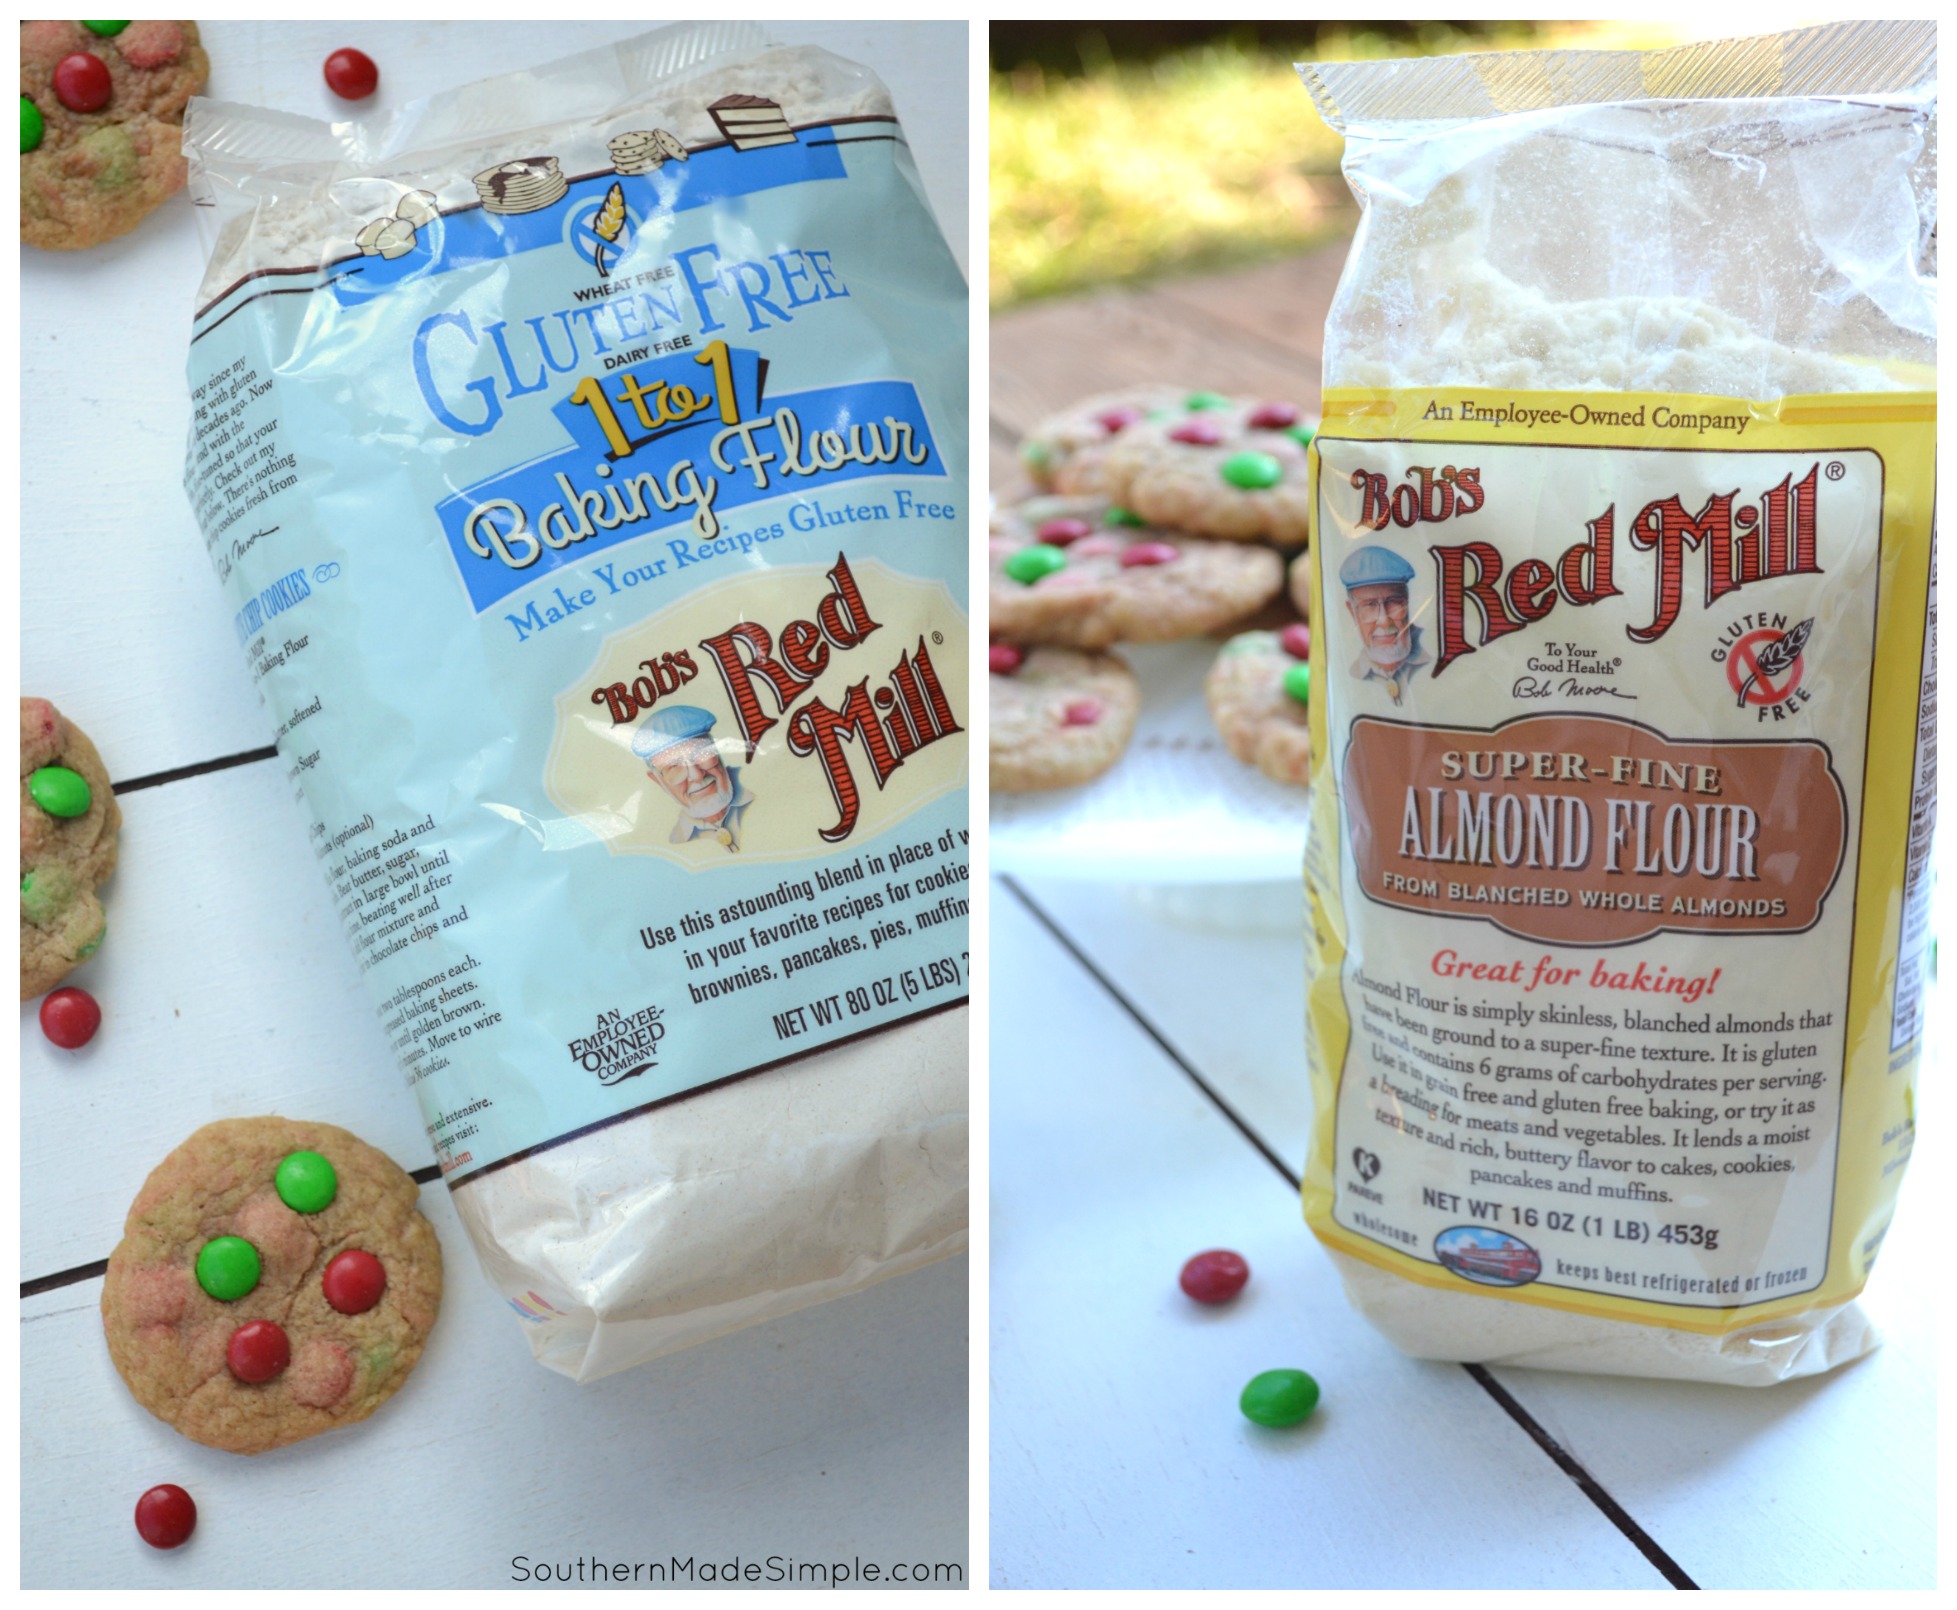 Looking for a simple DIY gift to give your friends this holiday season? Make them a jar of Santa's Cookies using @BobsRedMill flours to make their season bright! #BobsHolidayCheer